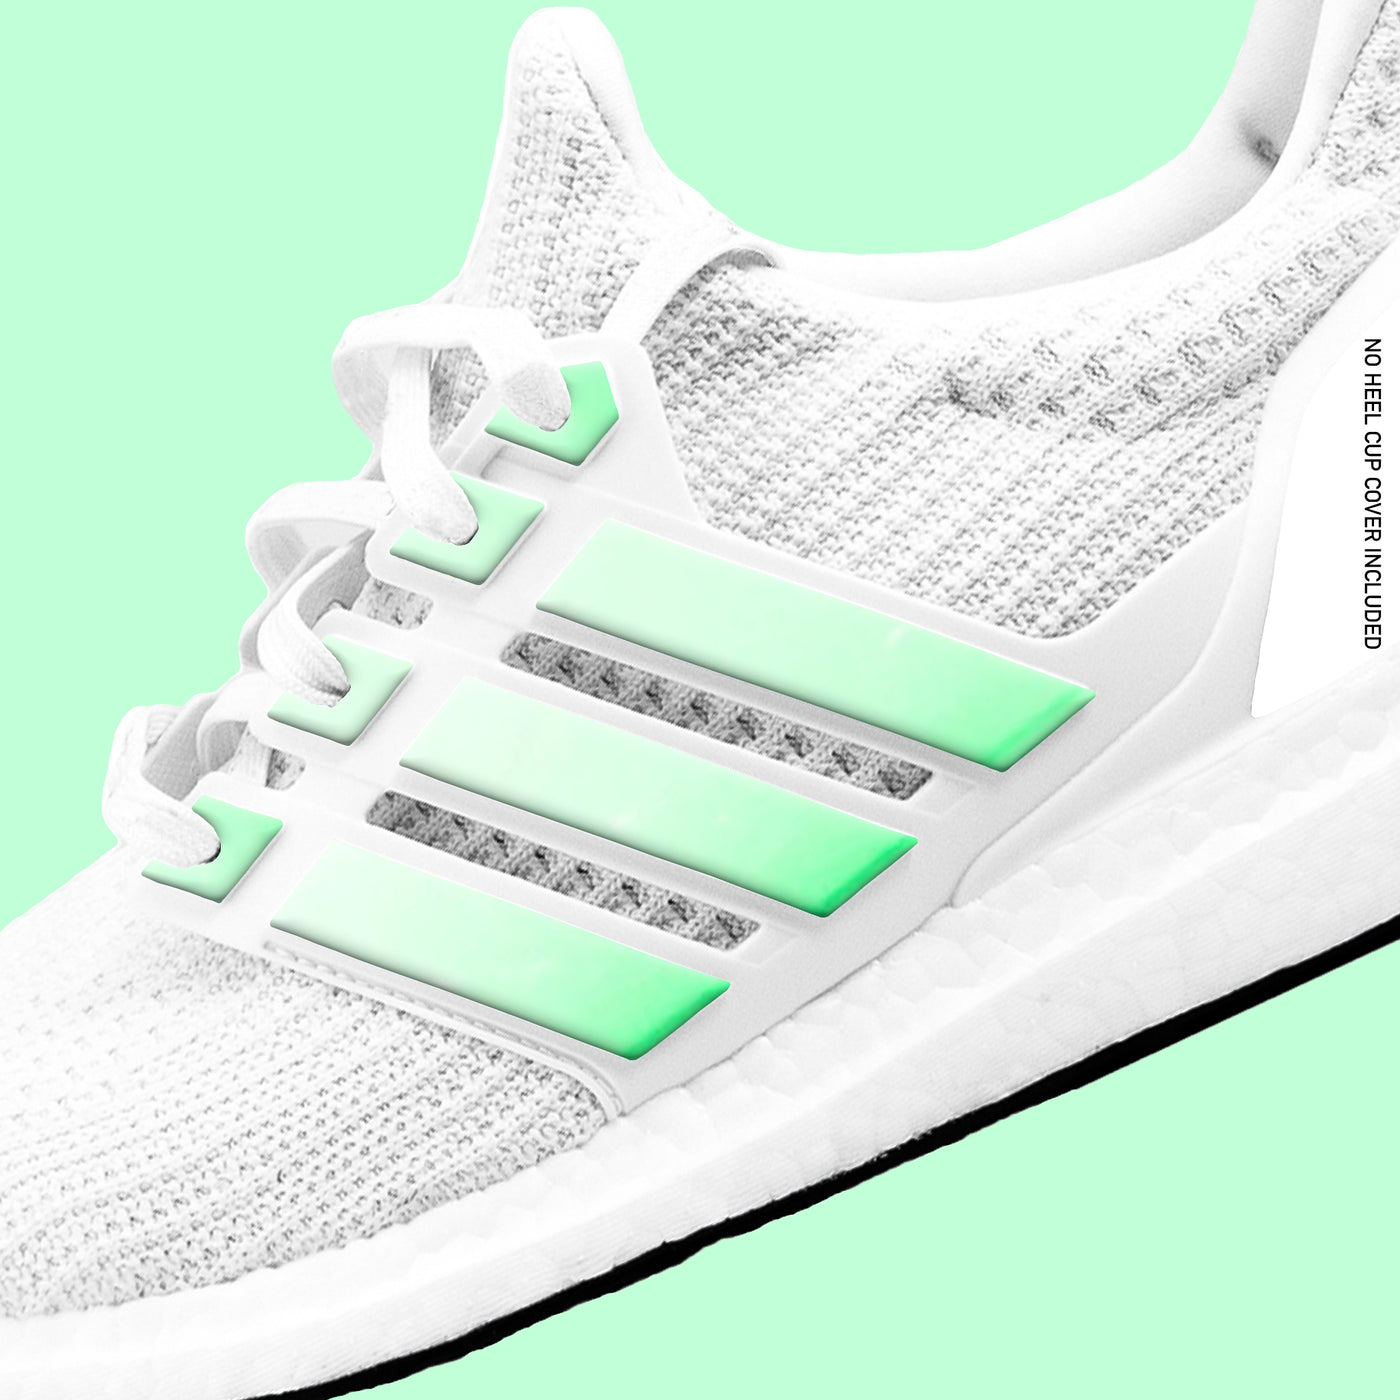 Glow in the Dark Ultra Boost Stripes (Laces not included)